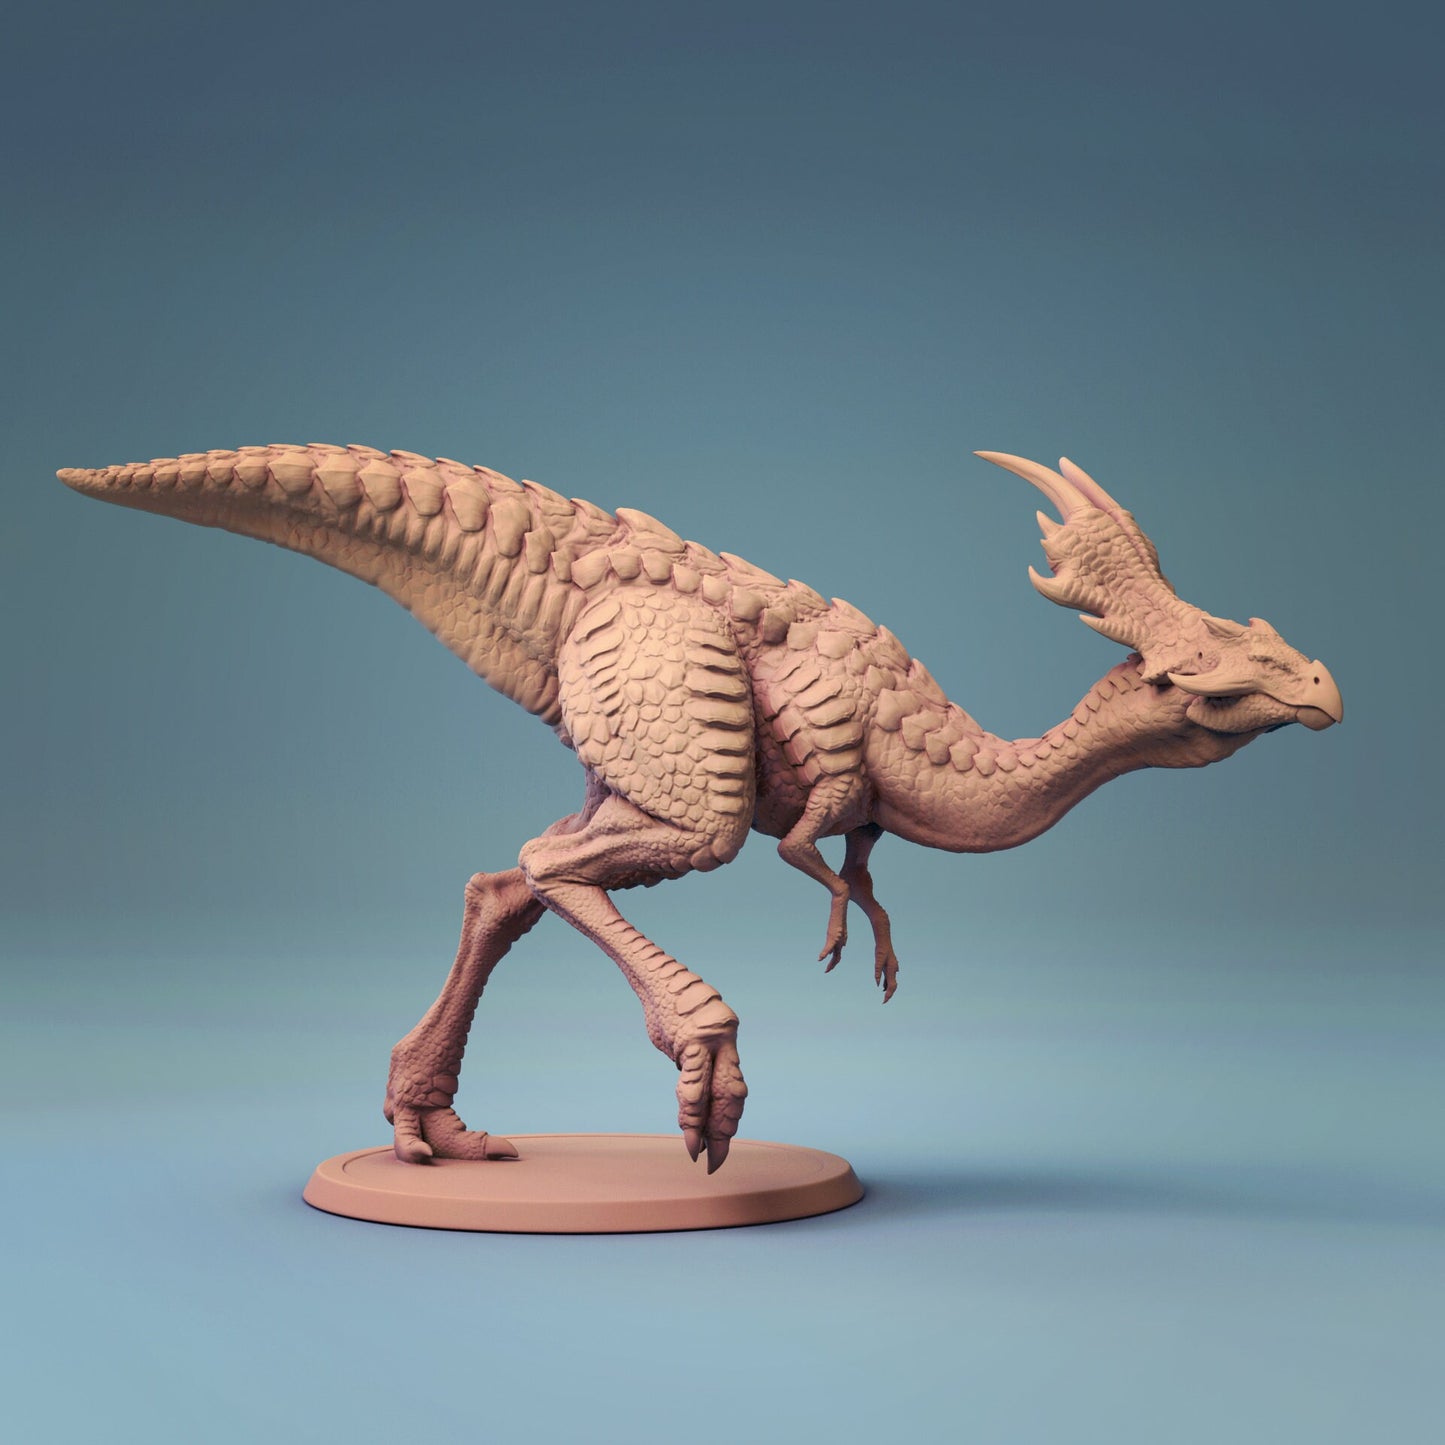 Austriceratops by Lord of the Print | Lord of the Print